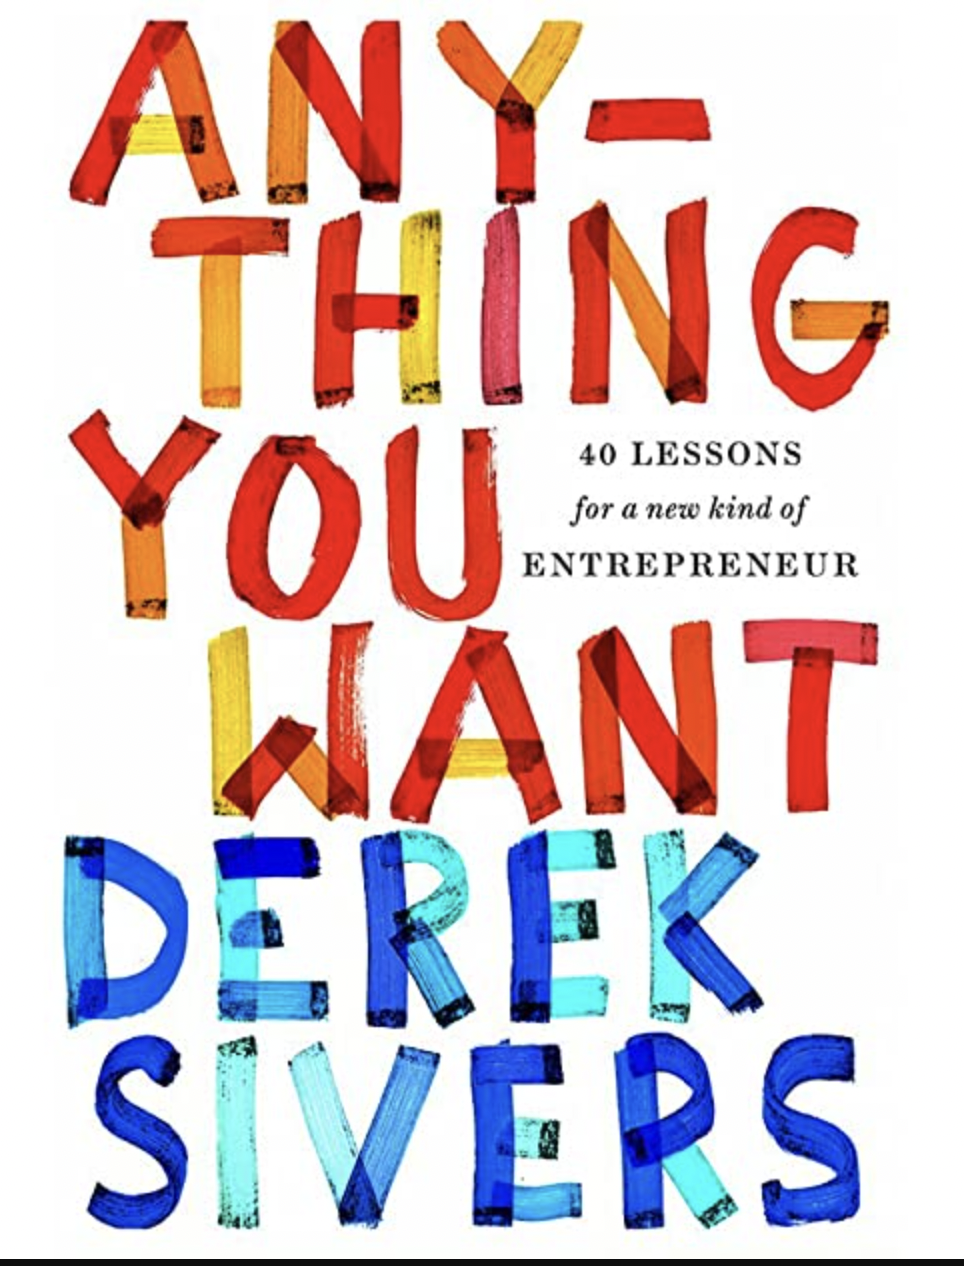 Anything You Want: 40 Lessons for a New Kind of Entrepreneur by Derek Sivers